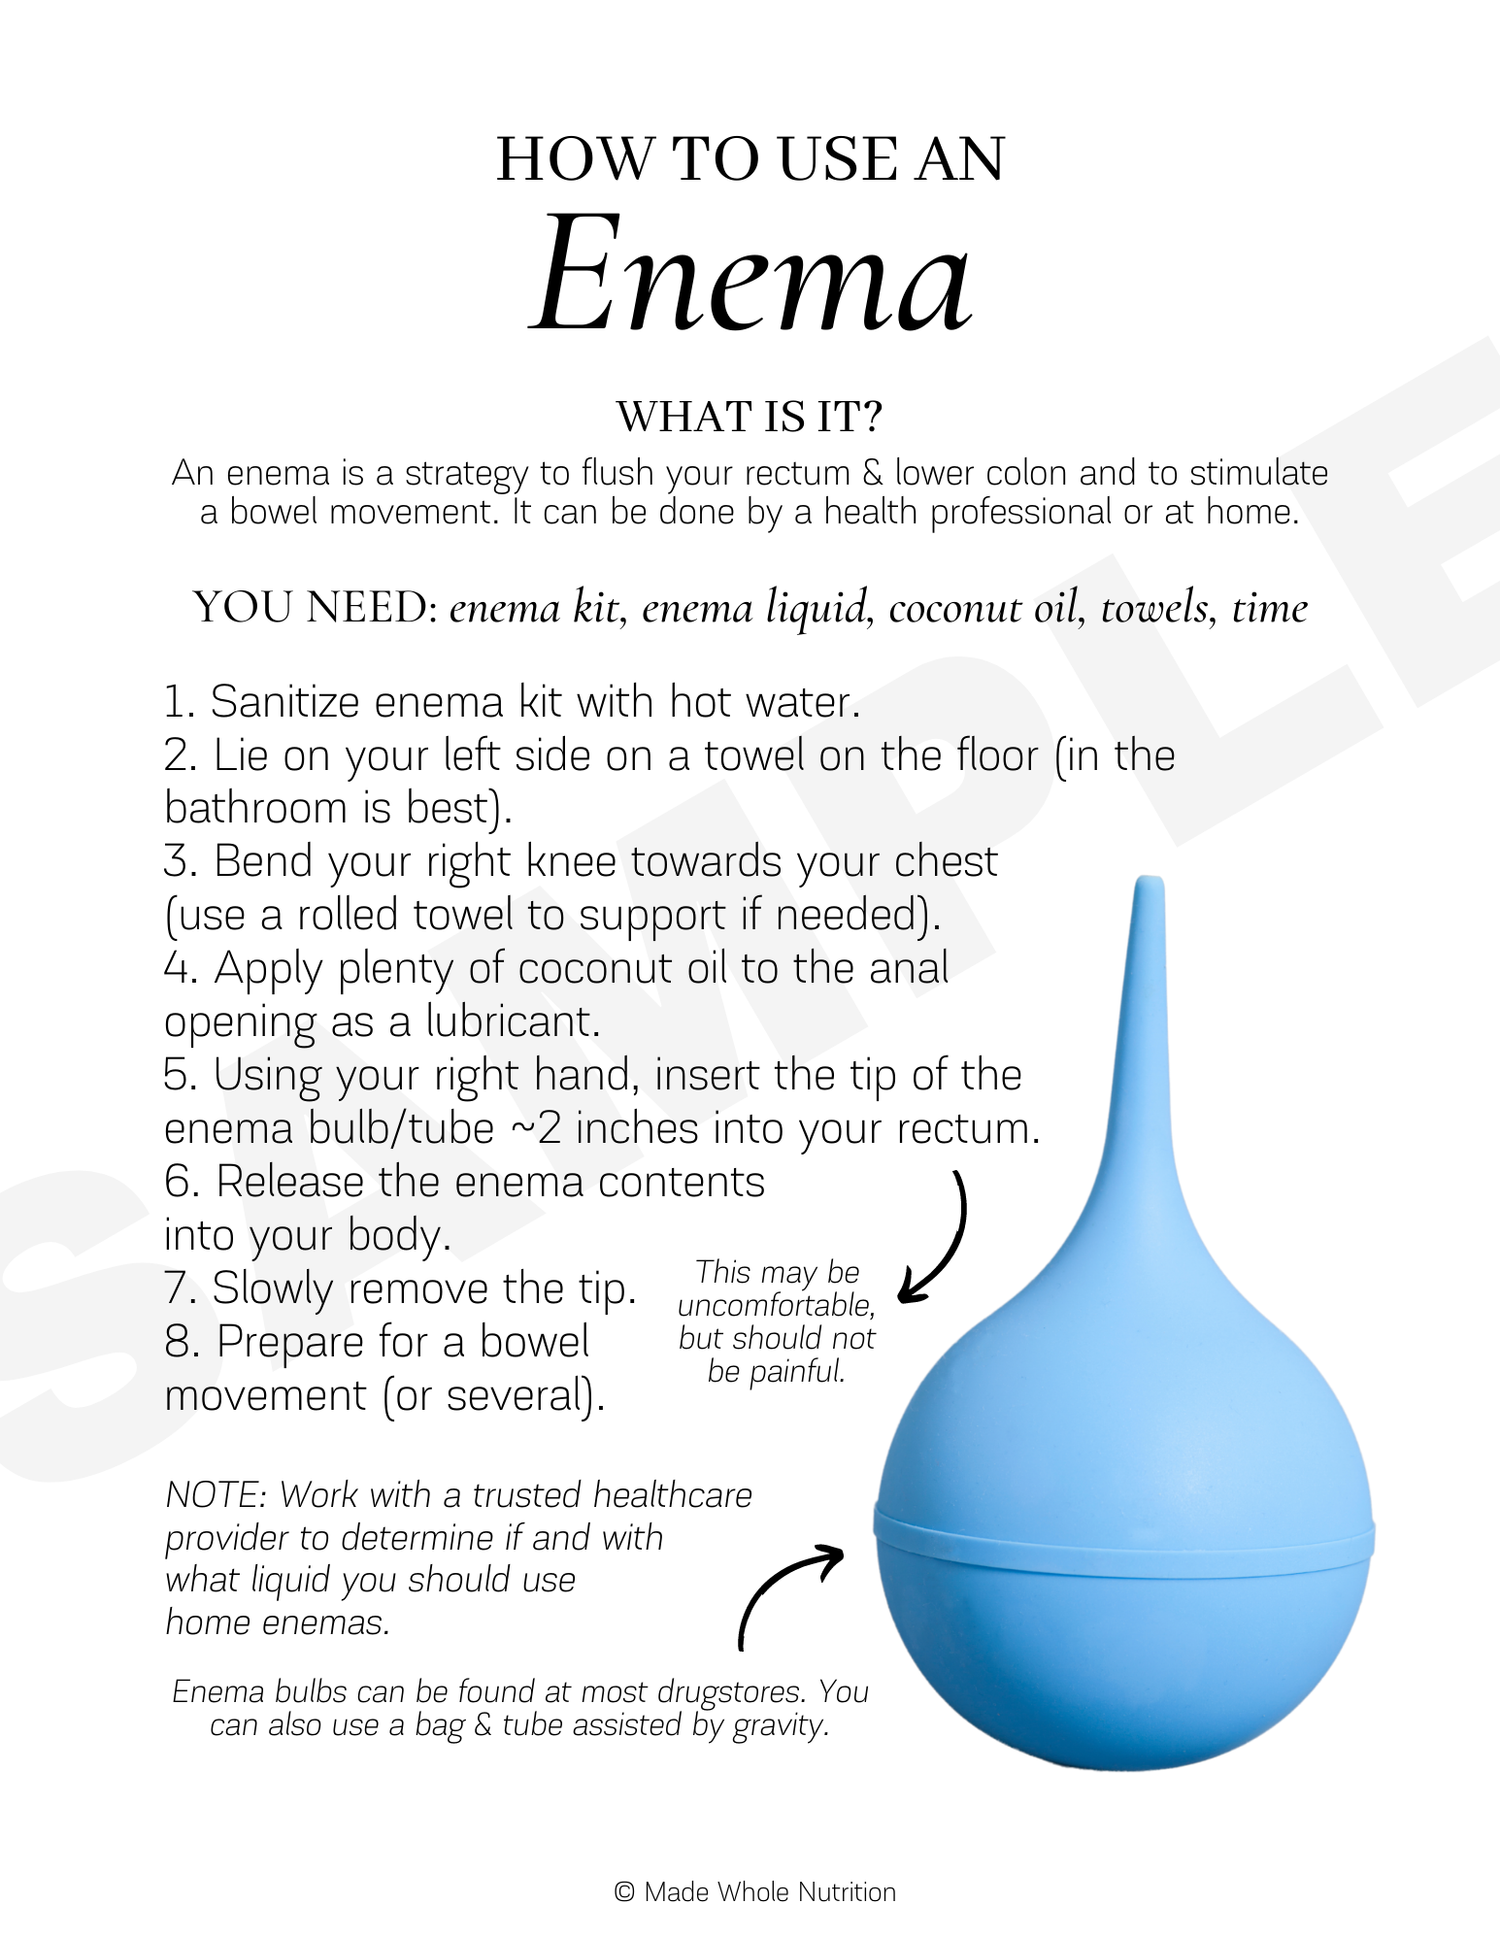 How to Use an Enema Handout — Functional Health Research + Resources — Made  Whole Nutrition